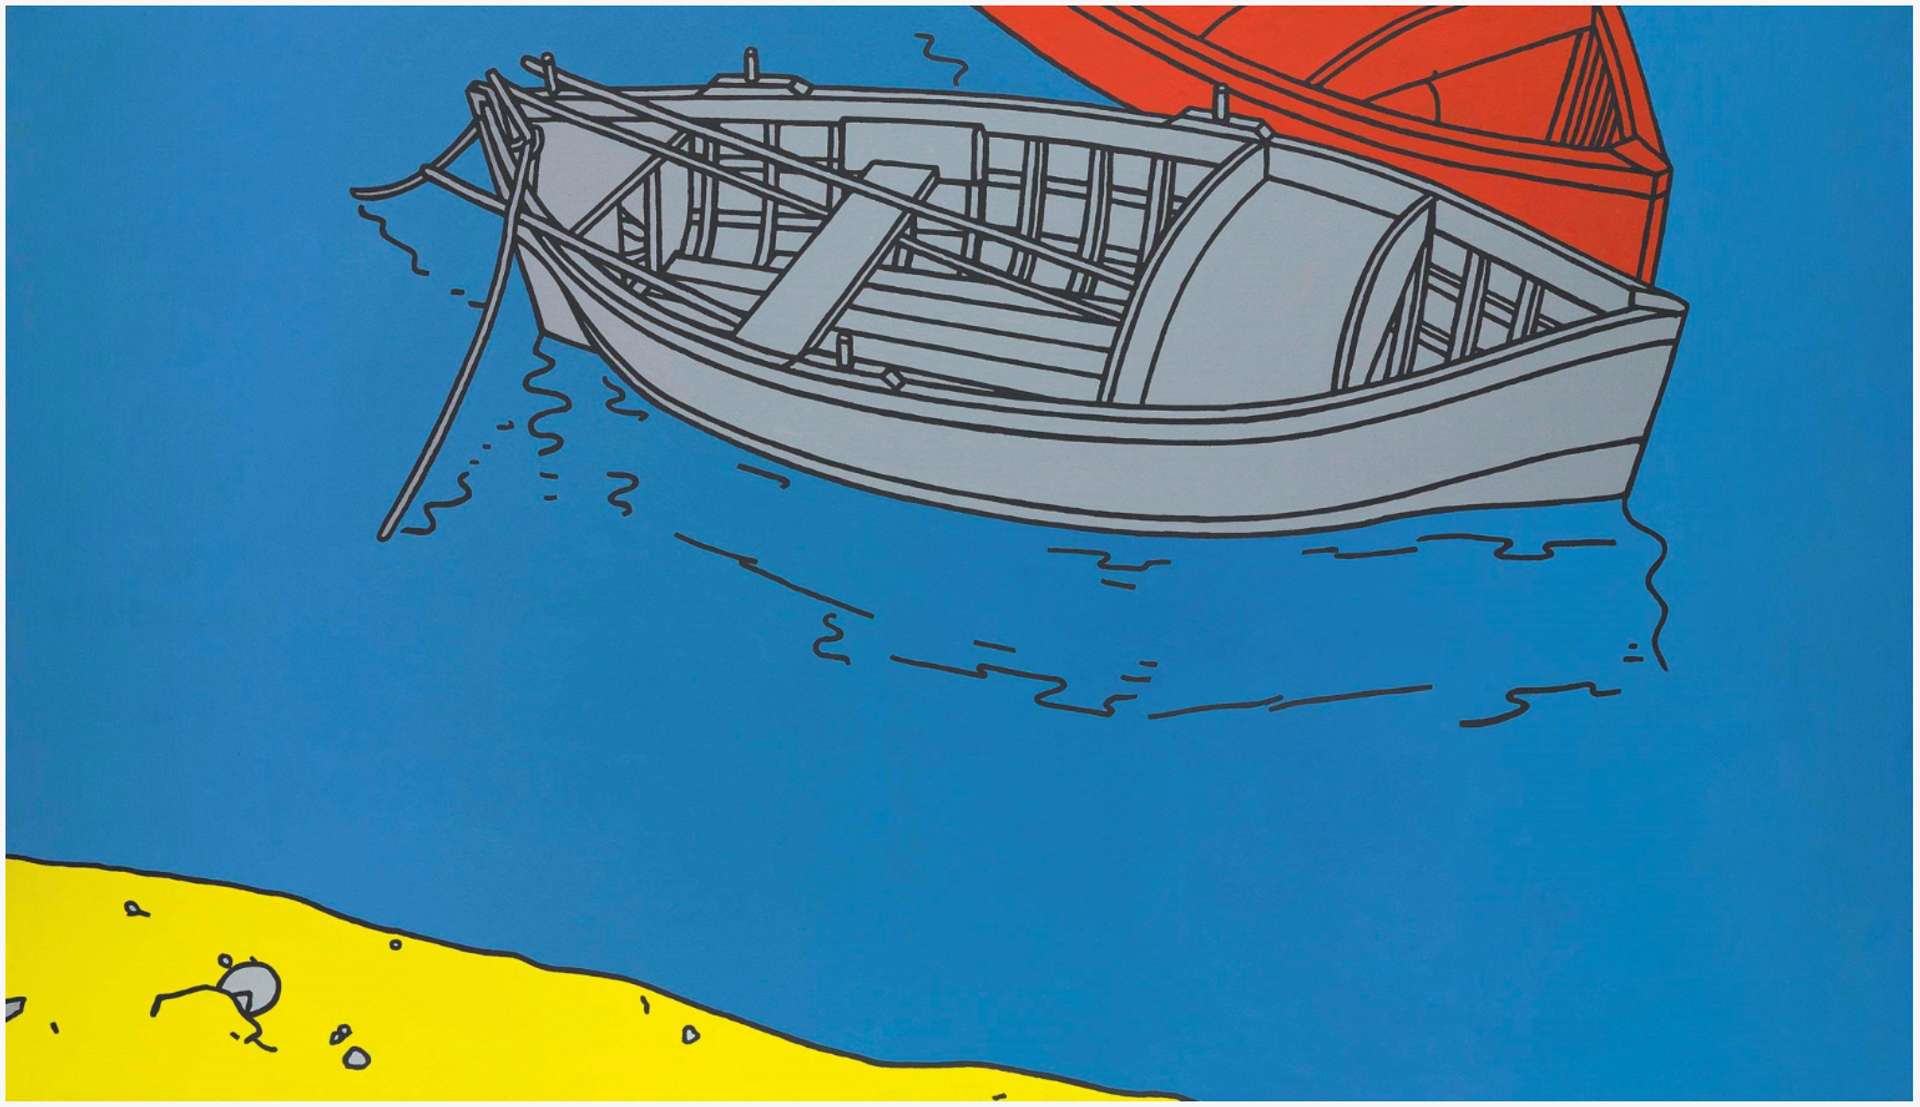  Cropped birds-eye view of anchored grey and red rowboats on vibrant blue water. A pop of yellow in the lower left corner indicates the shoreline.